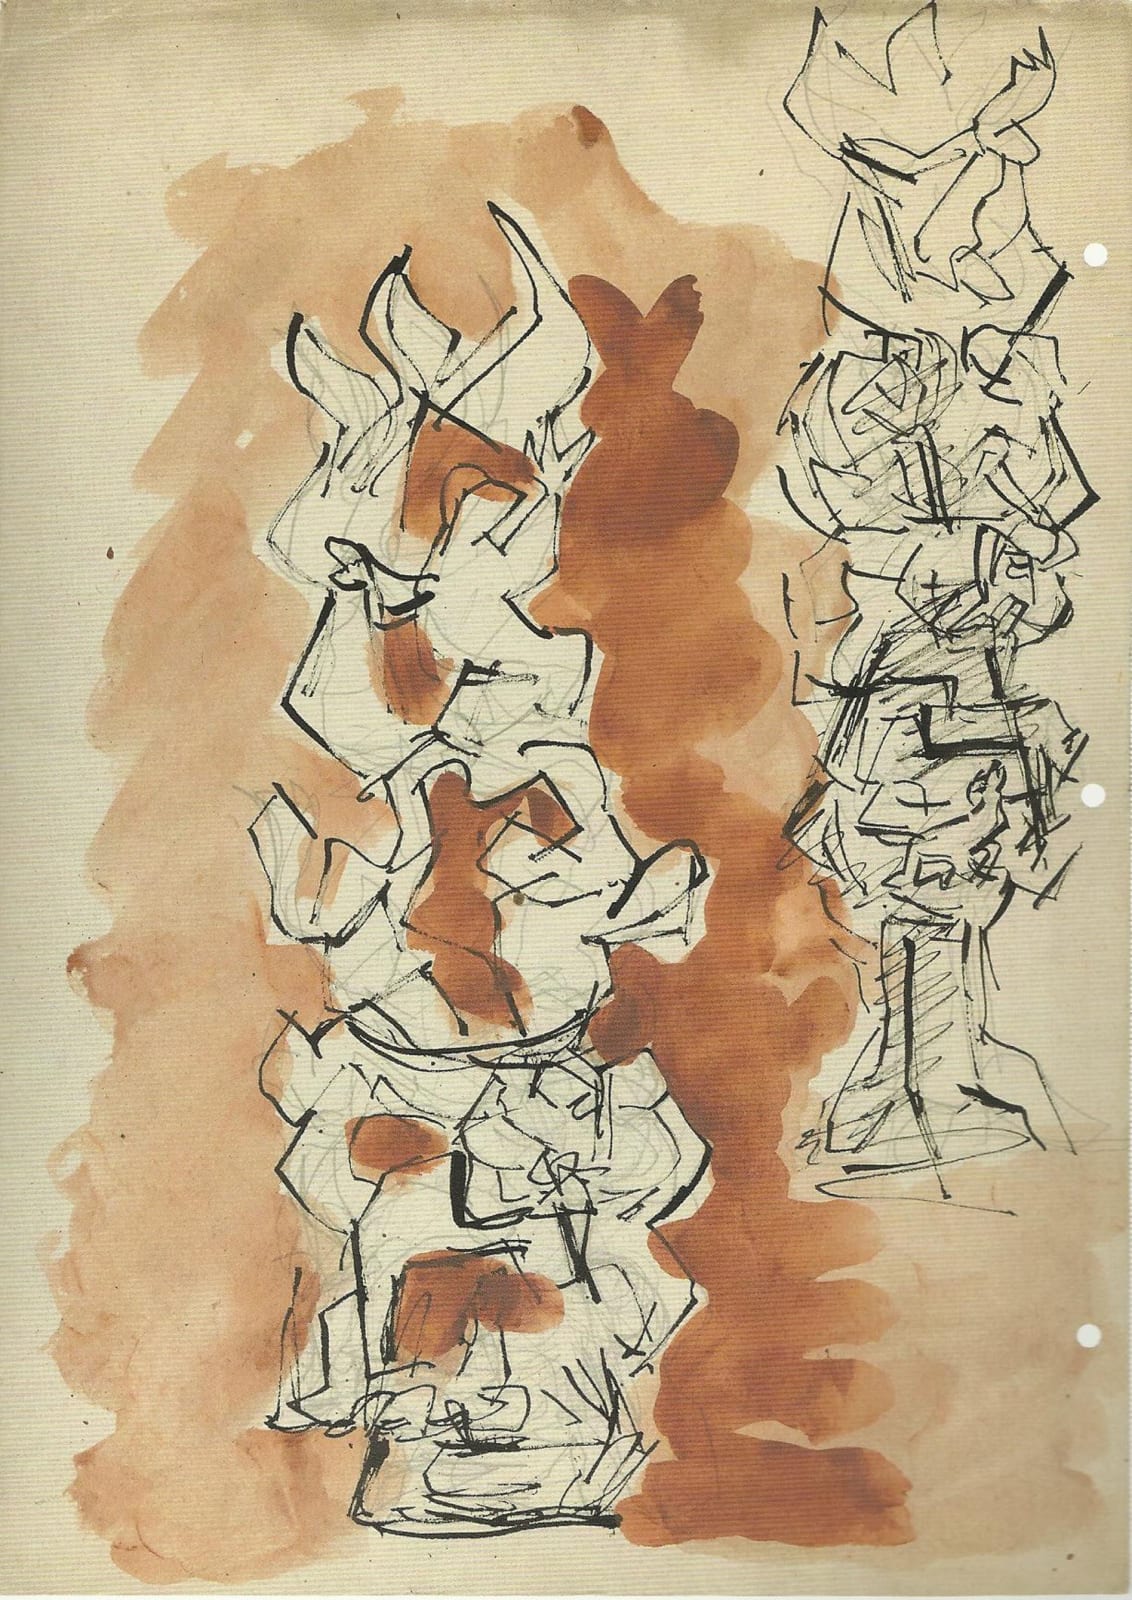 Jacques Lipchitz (1891-1973) Study for Between Heaven and Earth 1971-72 Pen and ink and wash on paper 43 x 31 cm Ben Uri Collection © Jacques Lipchitz estate To see and discover more about this artist click here